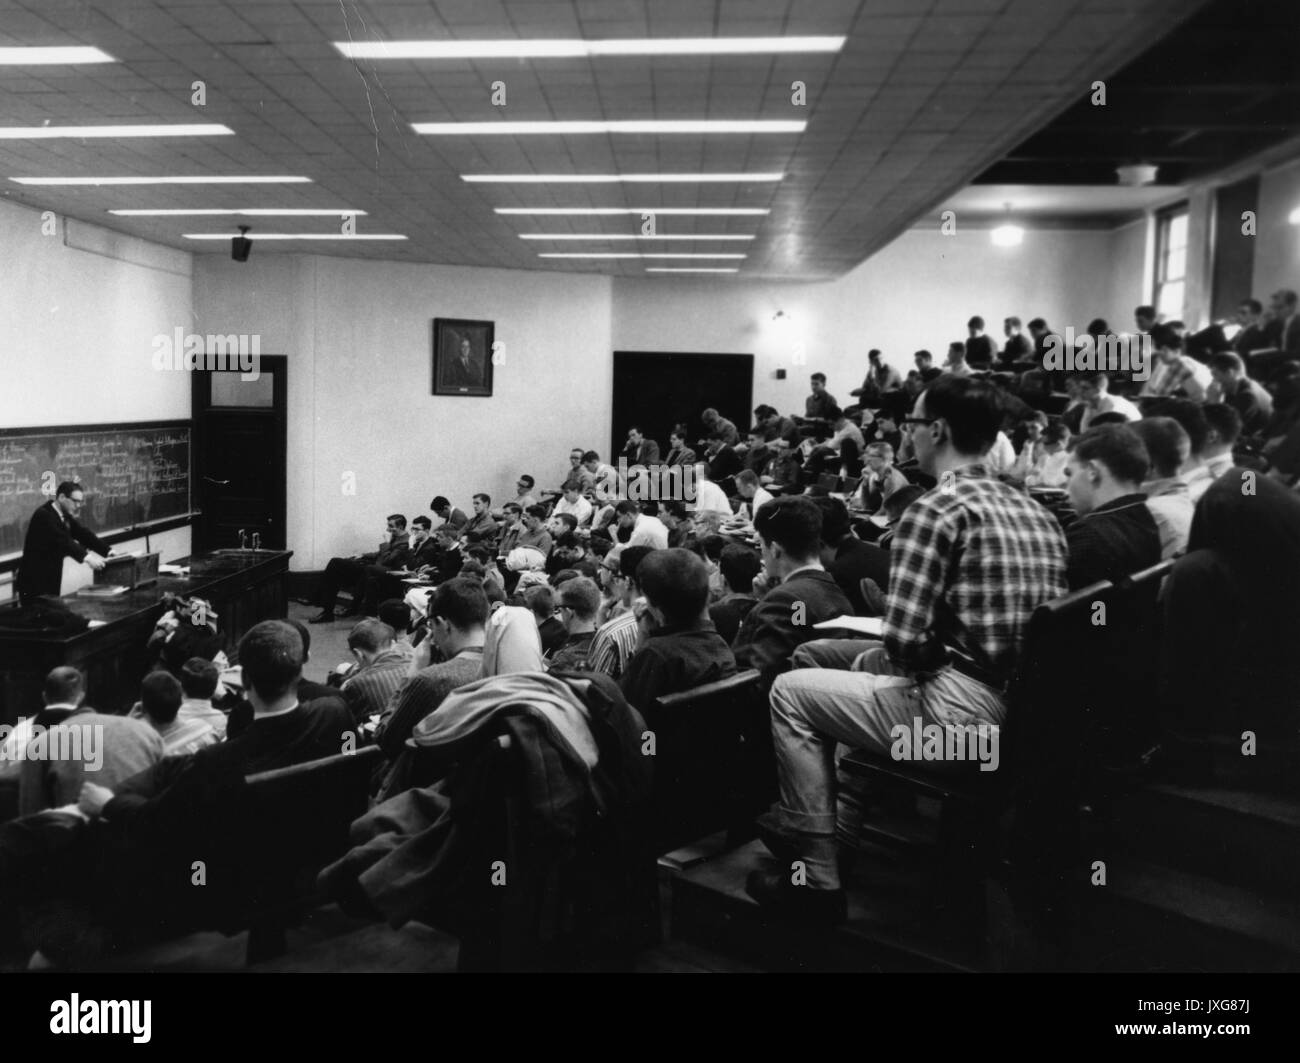 Classes, Gilman Hall Candid shot taken during an academic lecture in Gilman Hall, 1960. Stock Photo